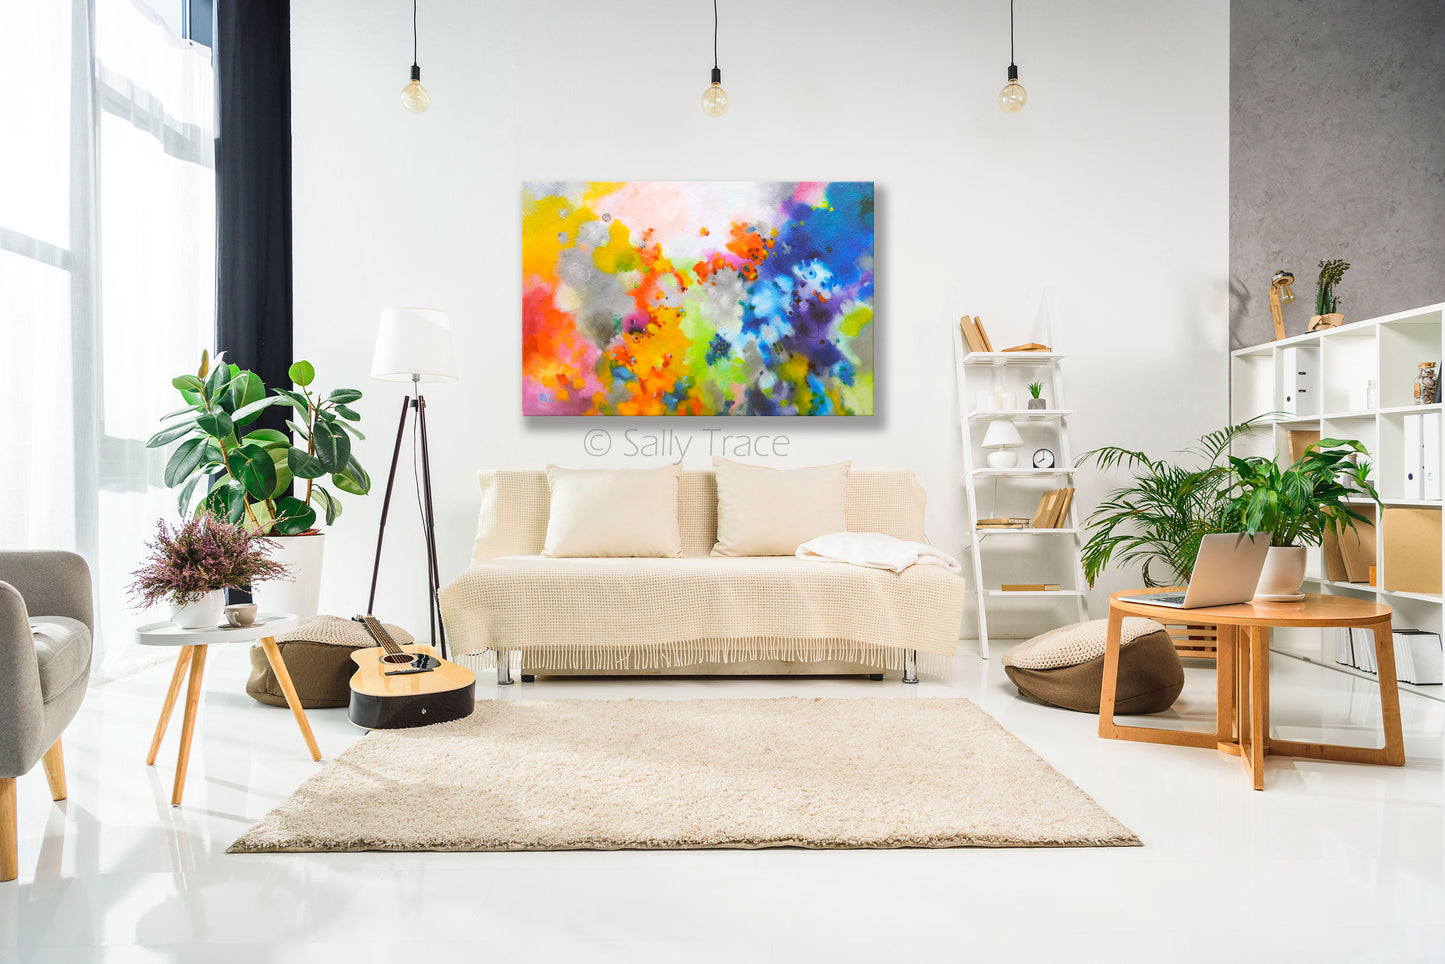 Modern contemporary fine art print on stretched canvas from the original painting by Sally Trace. Shown in a modern living room as wall art and living room decor